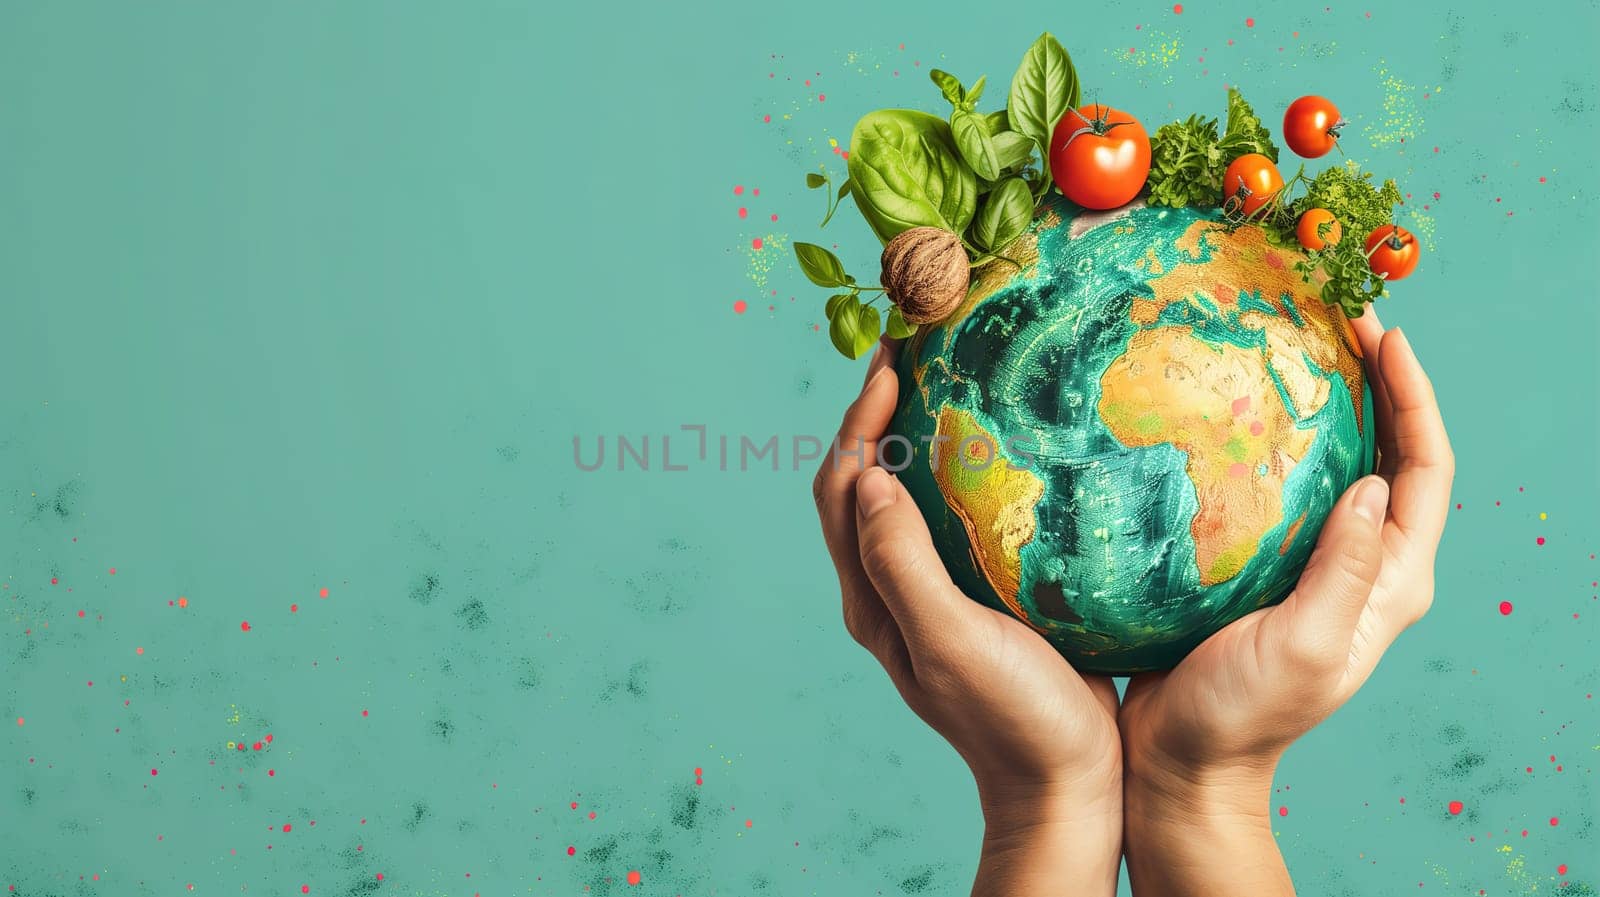 A person is holding a globe with a variety of fresh vegetables placed on top of it. The globe is being held in both hands, with the vegetables arranged neatly around it.